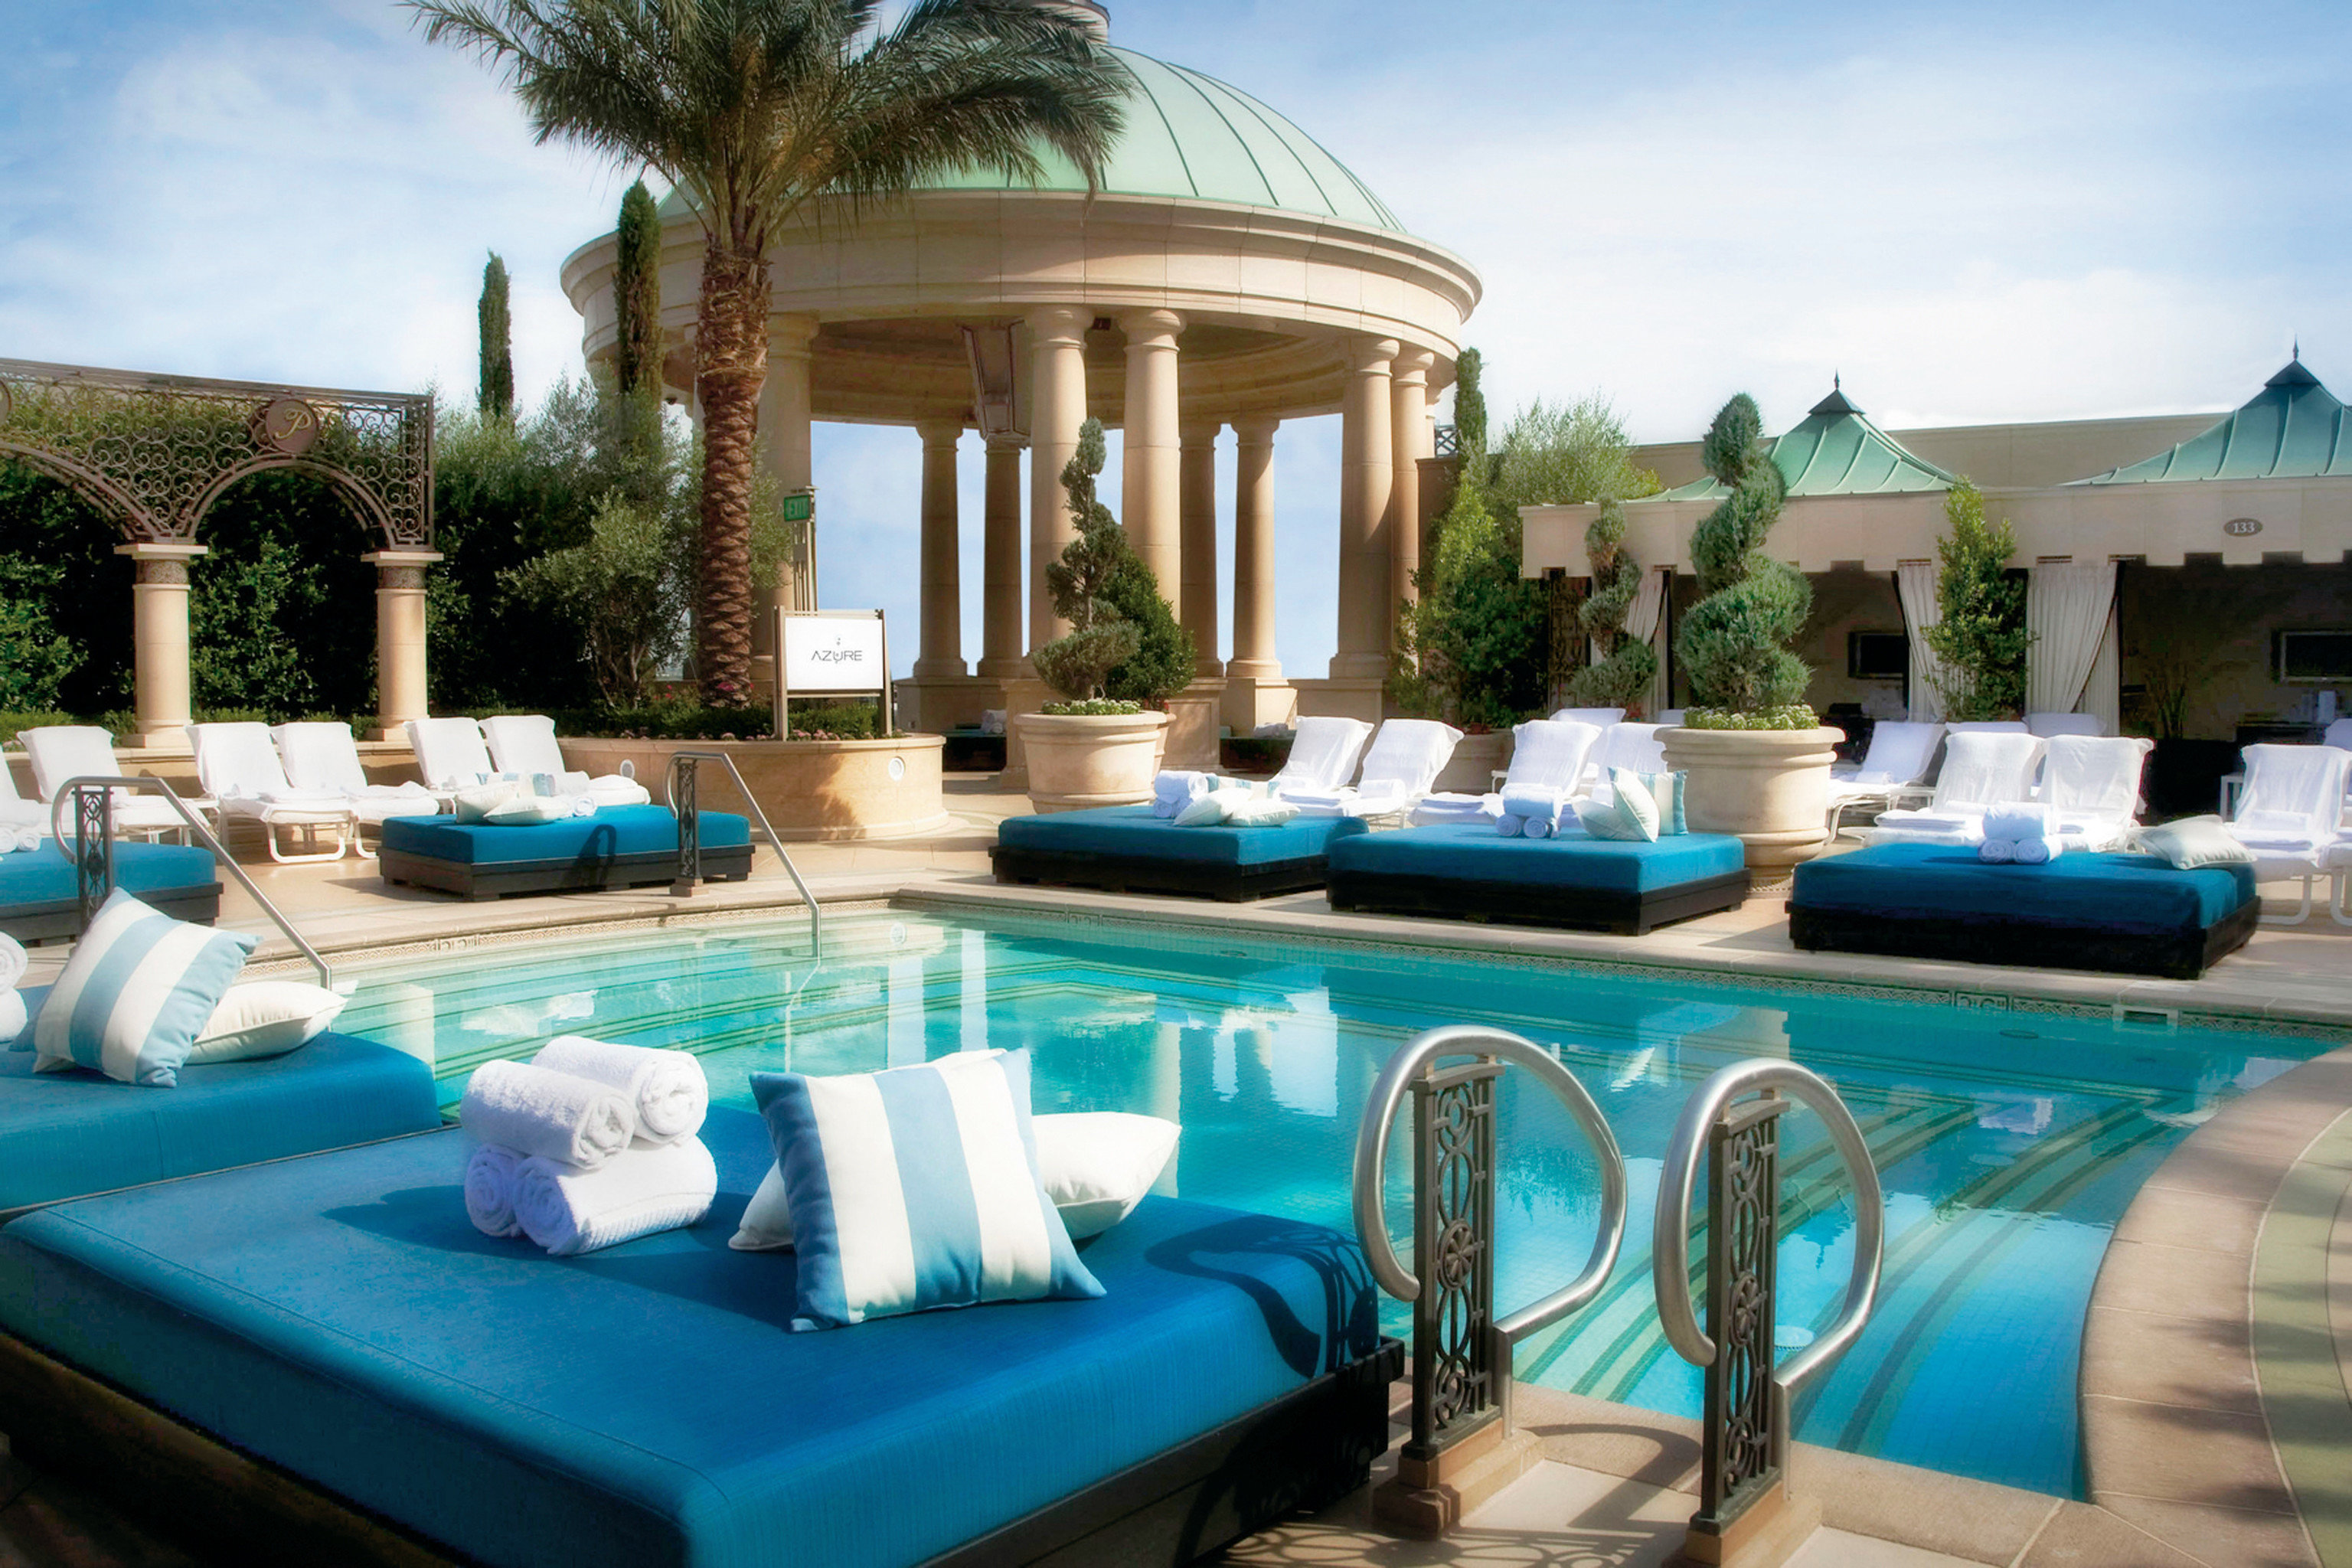 Mandalay Bay Resort on X: Relax. Unwind. Get in that pool day